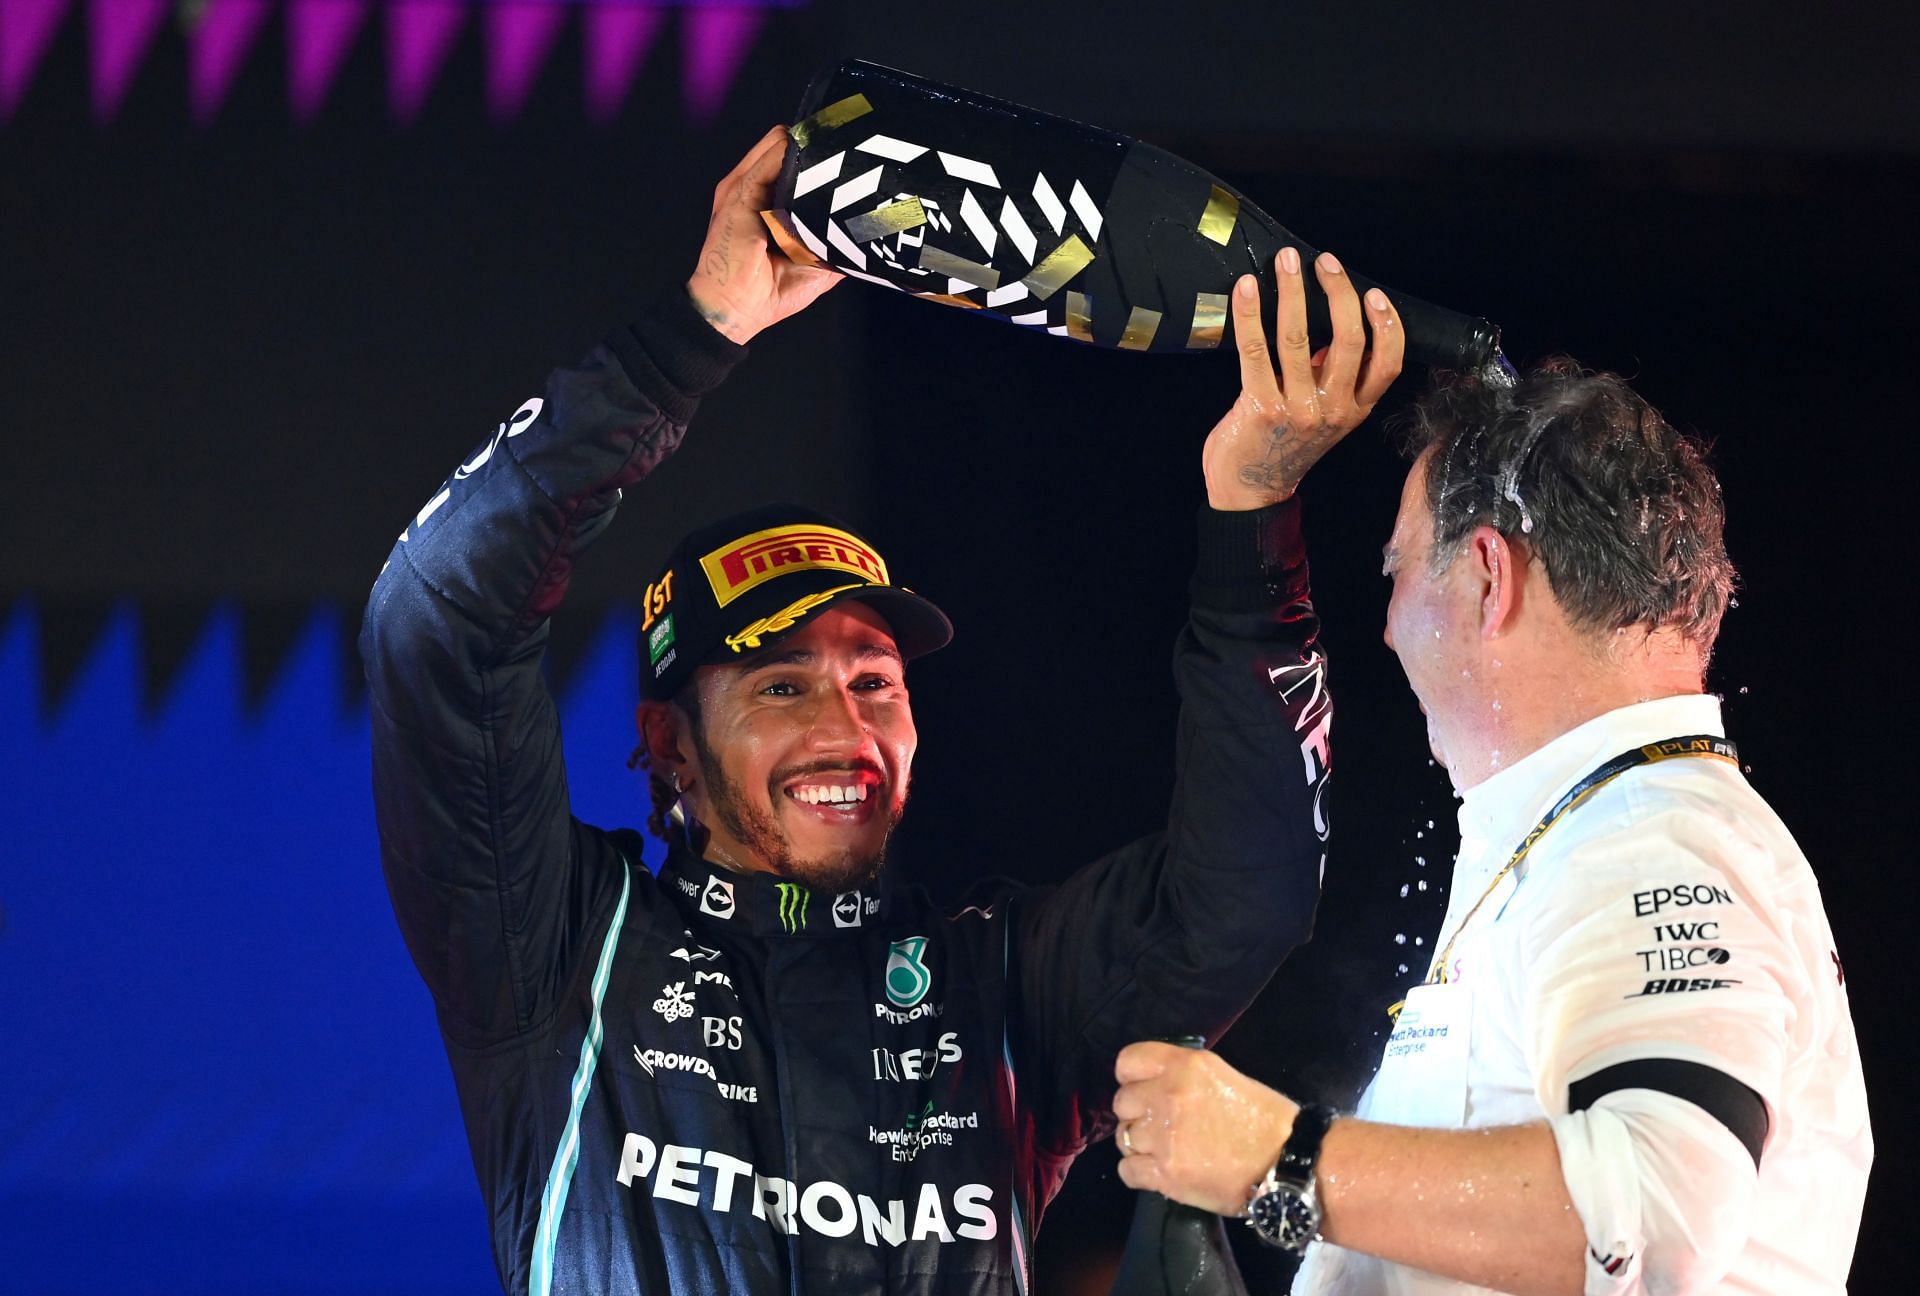 Lewis Hamilton is not the biggest fan of Max Verstappen after what happened in the Saudi Arabian Grand Prix